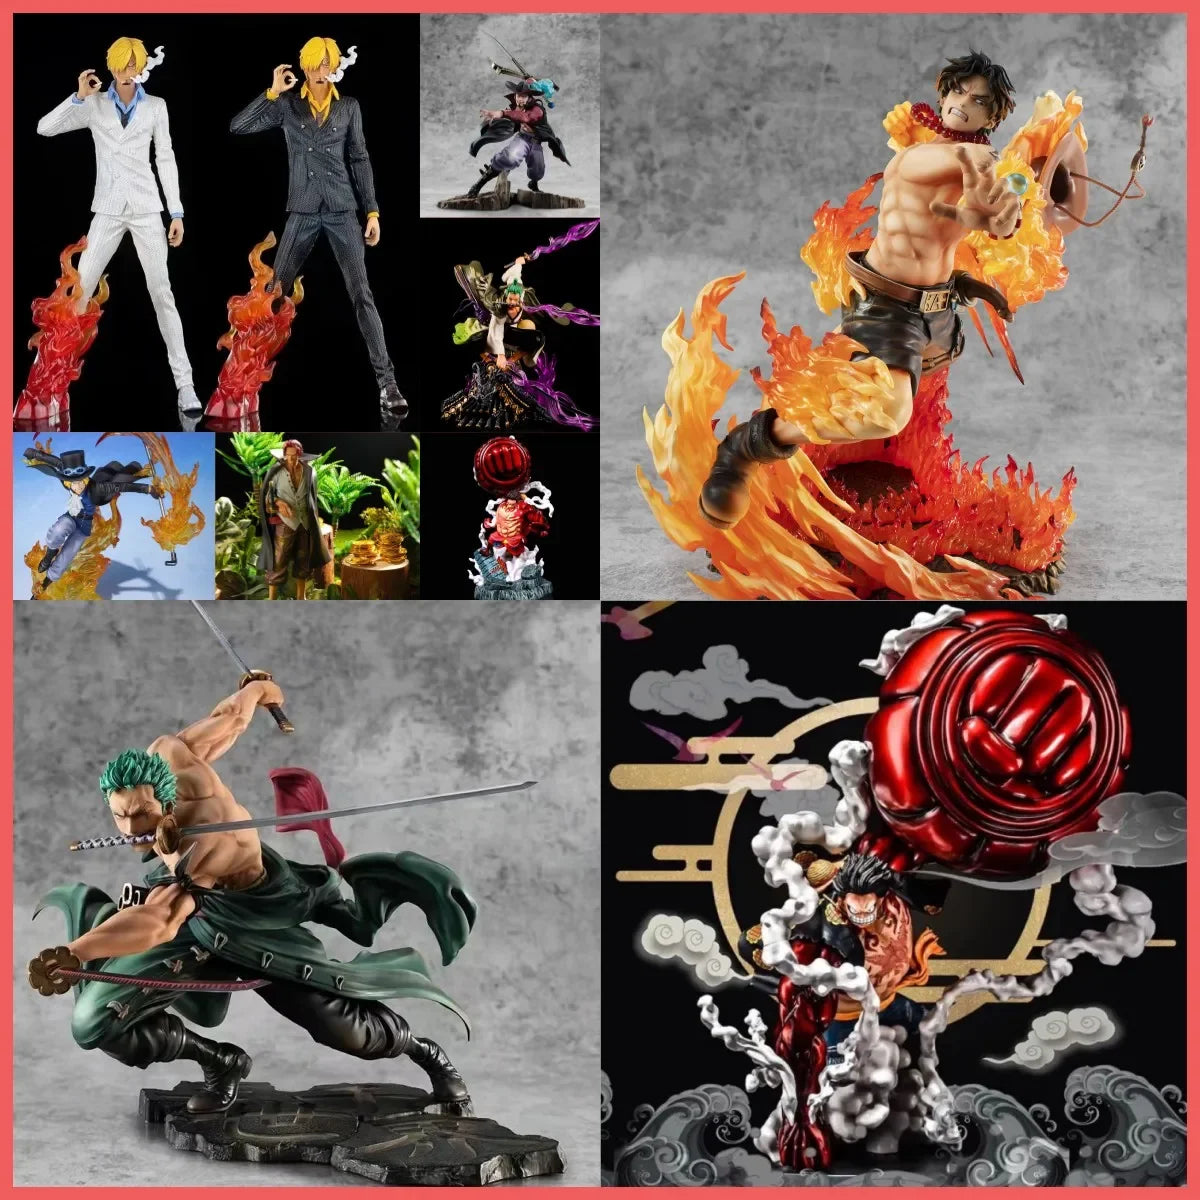 Anime Figure Mystery Blind Box - Featuring Dragon Ball, One Piece, Demon Slayer PVC Action Figures